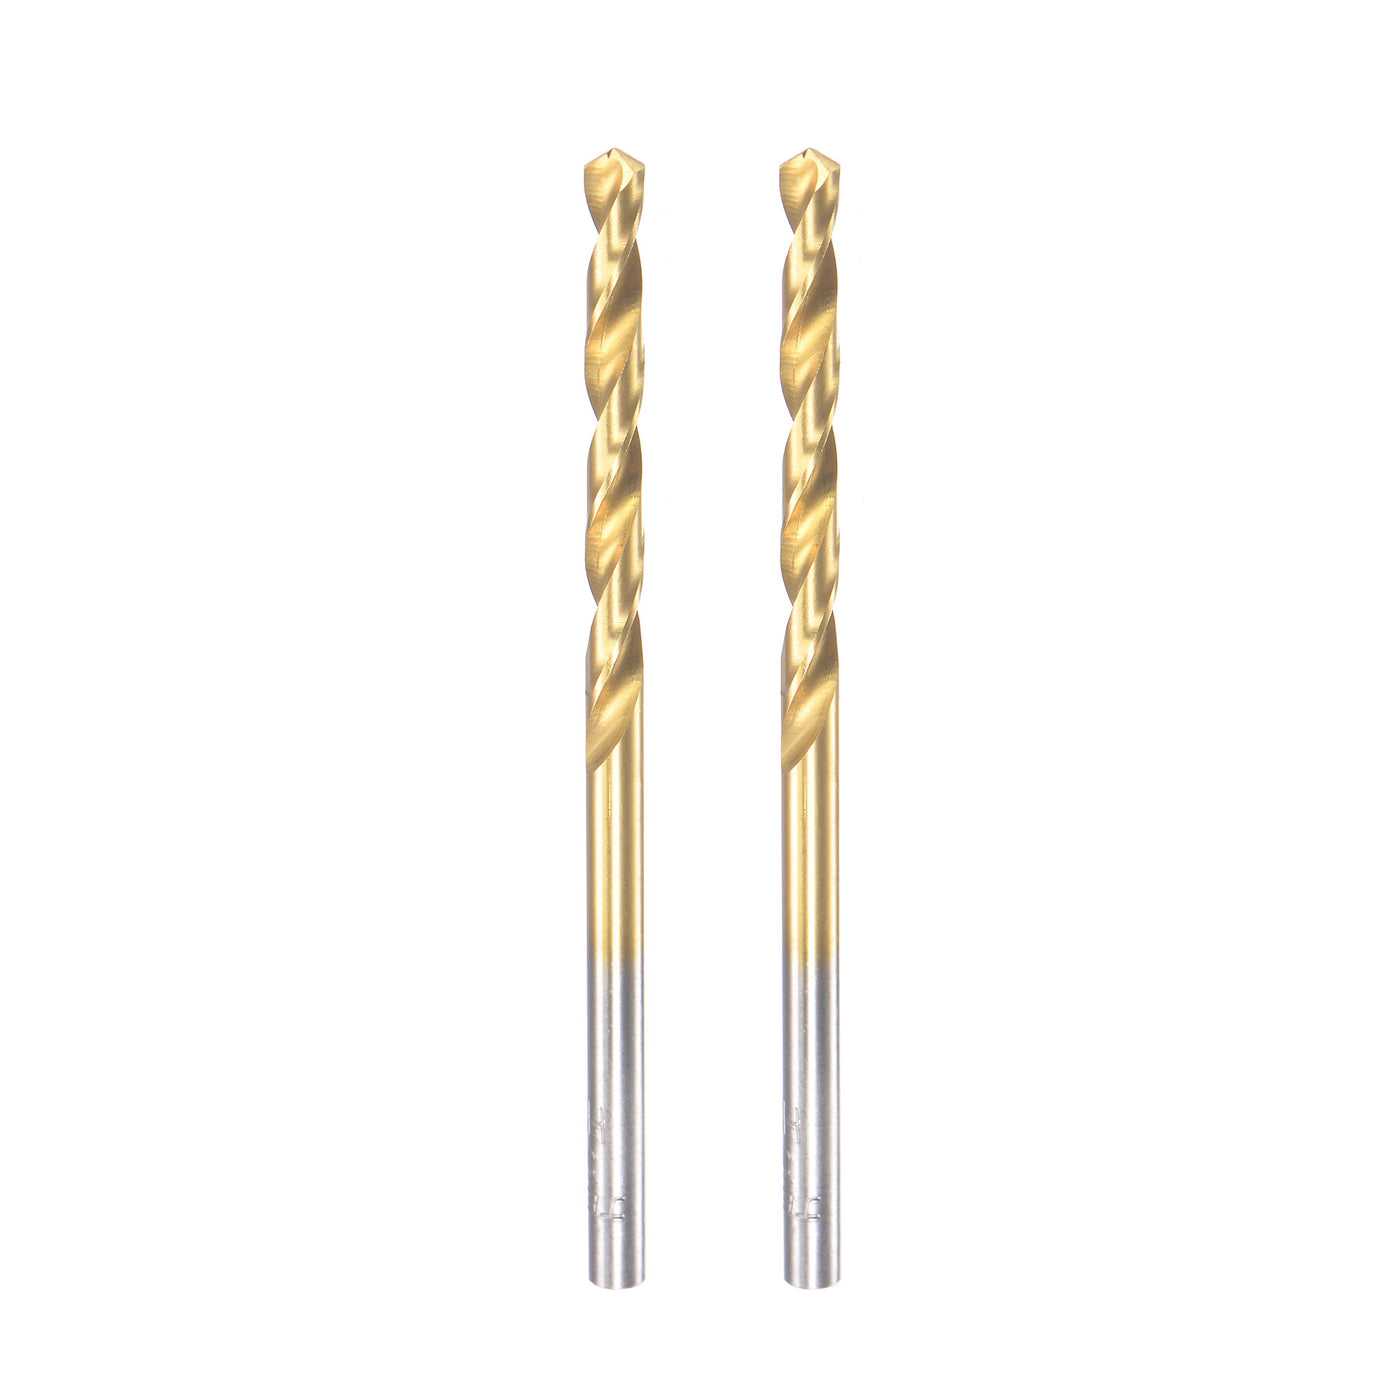 uxcell Uxcell High Speed Steel Twist Drill Bit 3.4mm Fully Ground Titanium Coated 2 Pcs